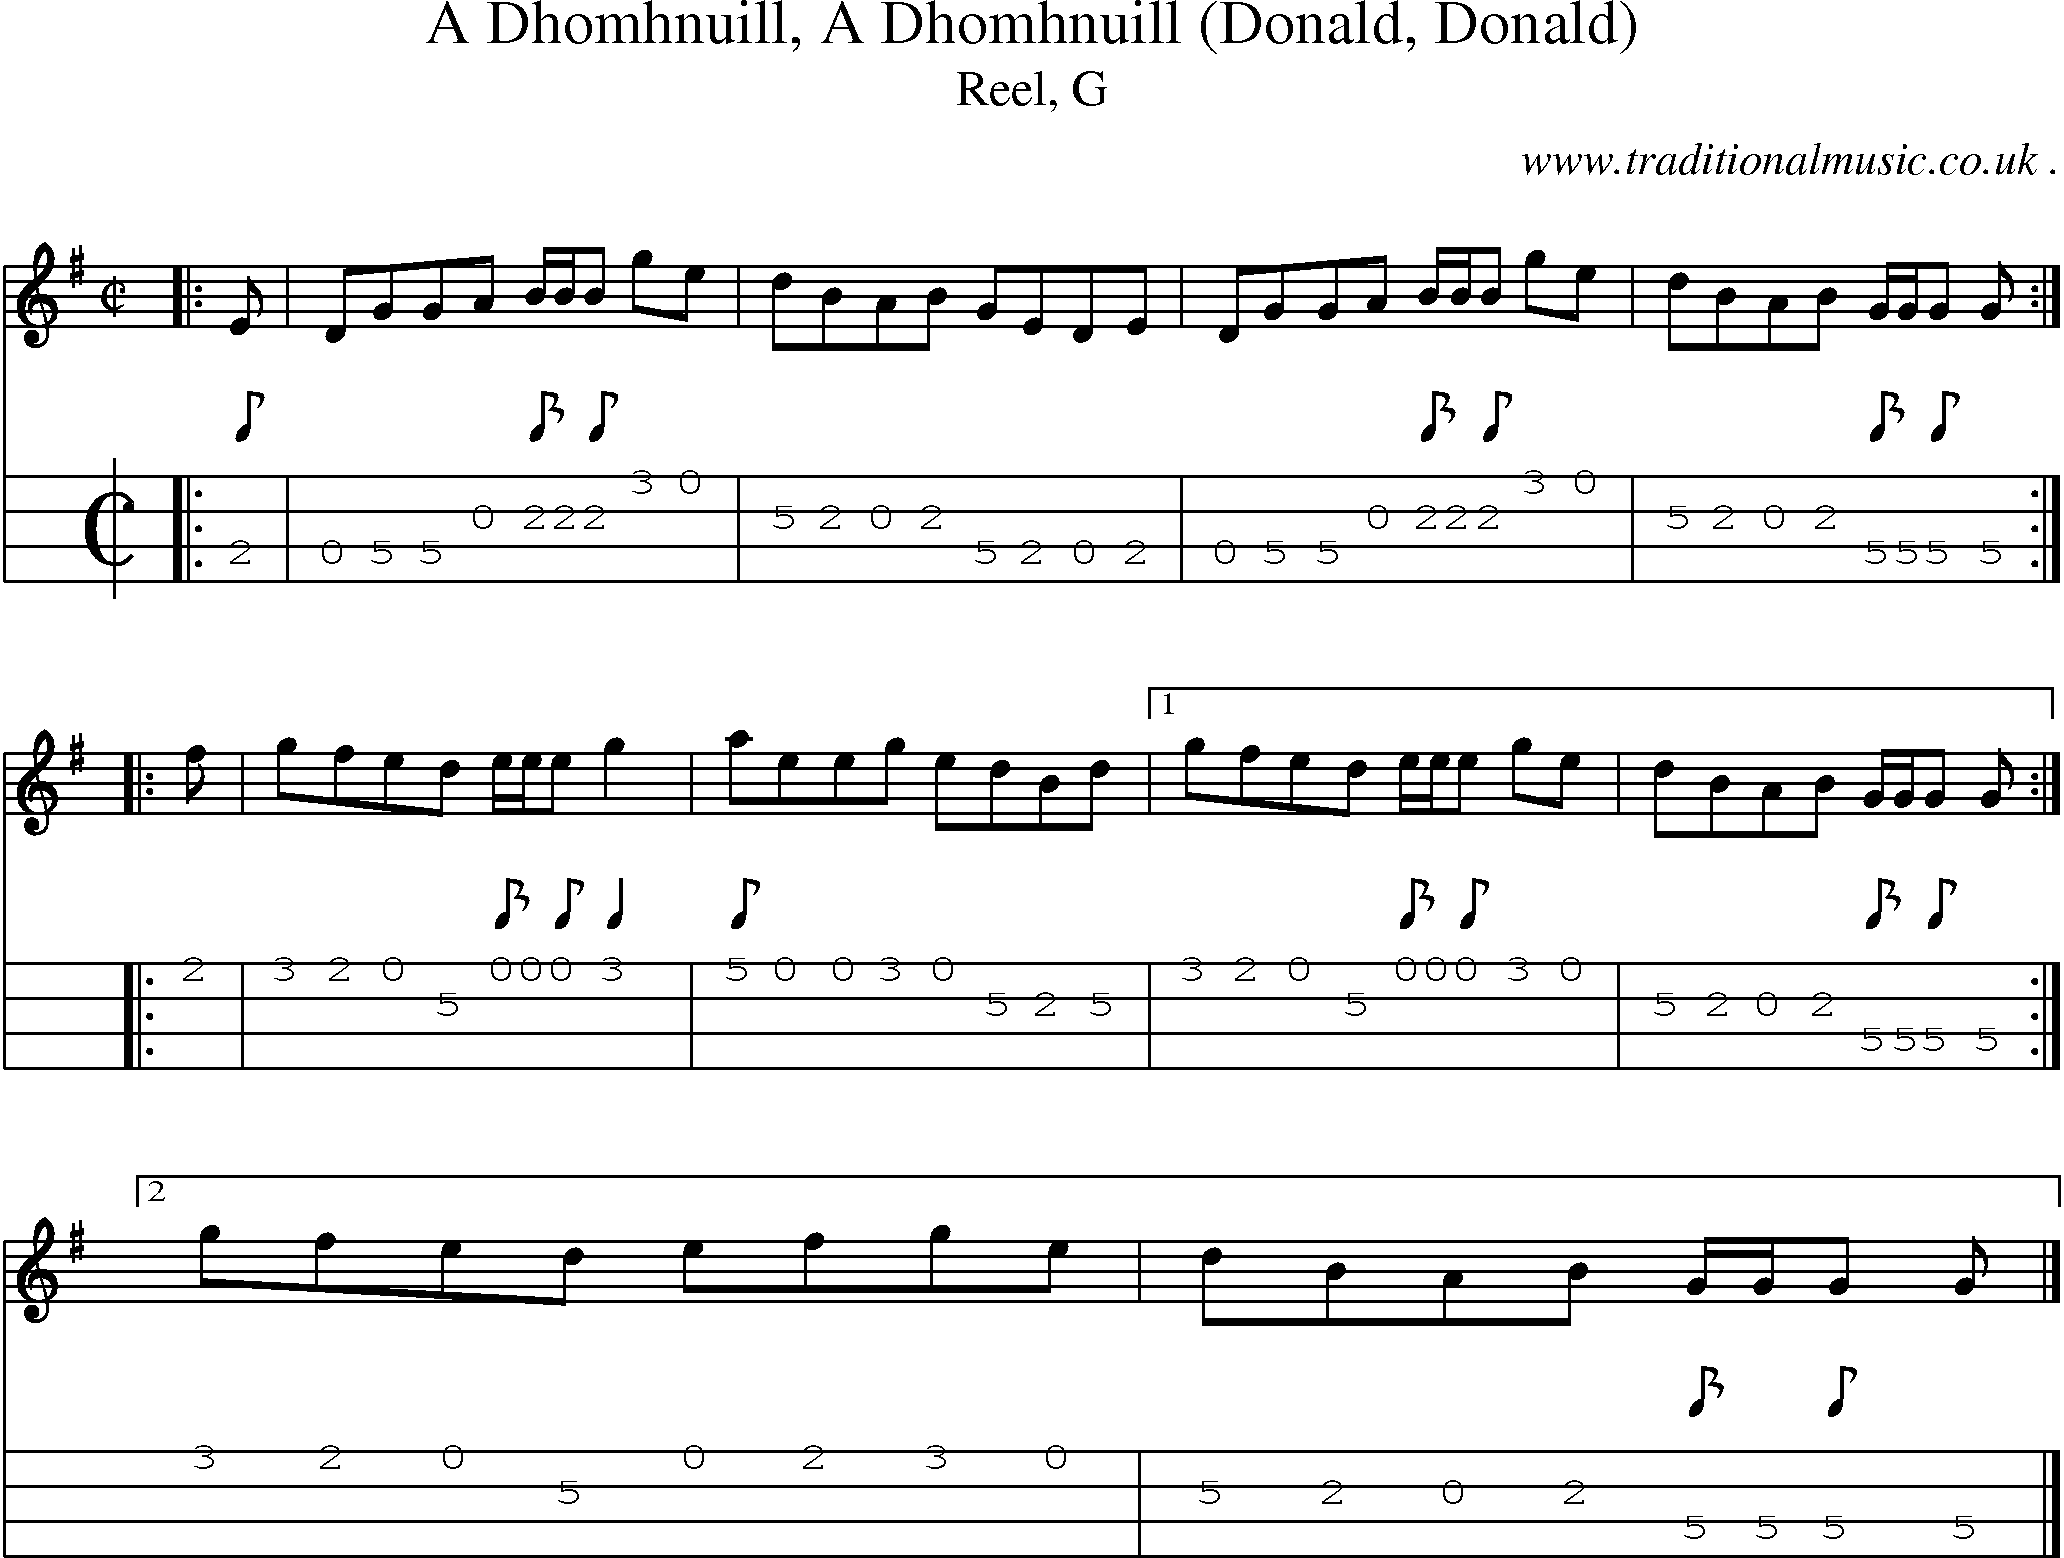 Sheet-music  score, Chords and Mandolin Tabs for A Dhomhnuill A Dhomhnuill Donald Donald